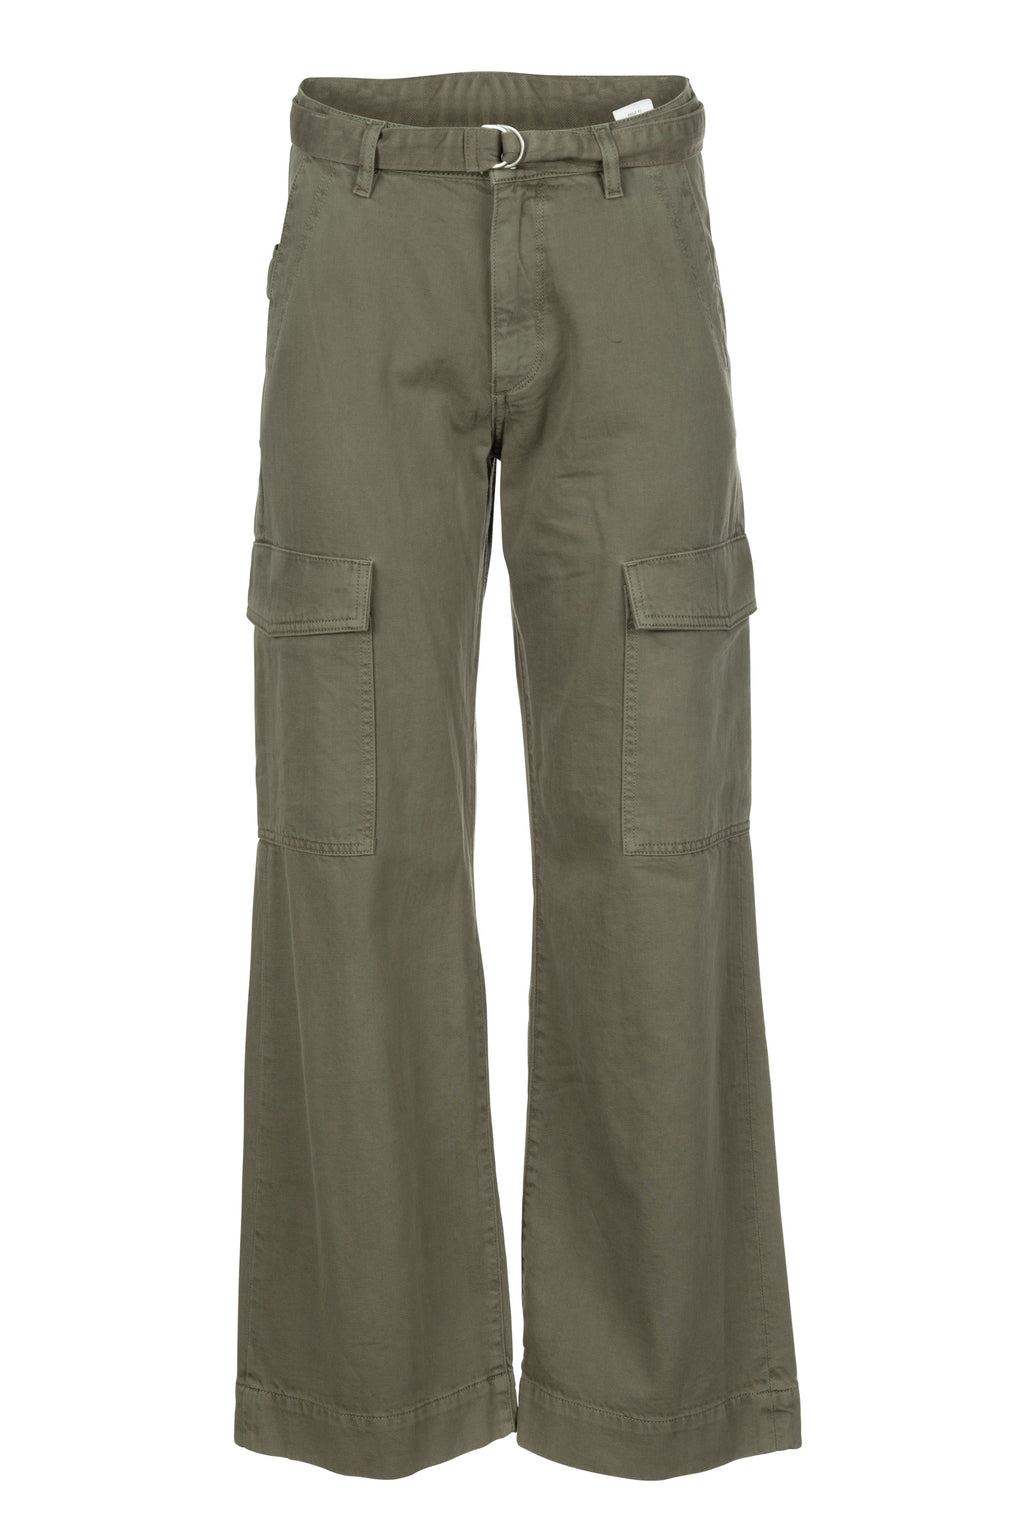 Zoie Cargo Pant - Olive